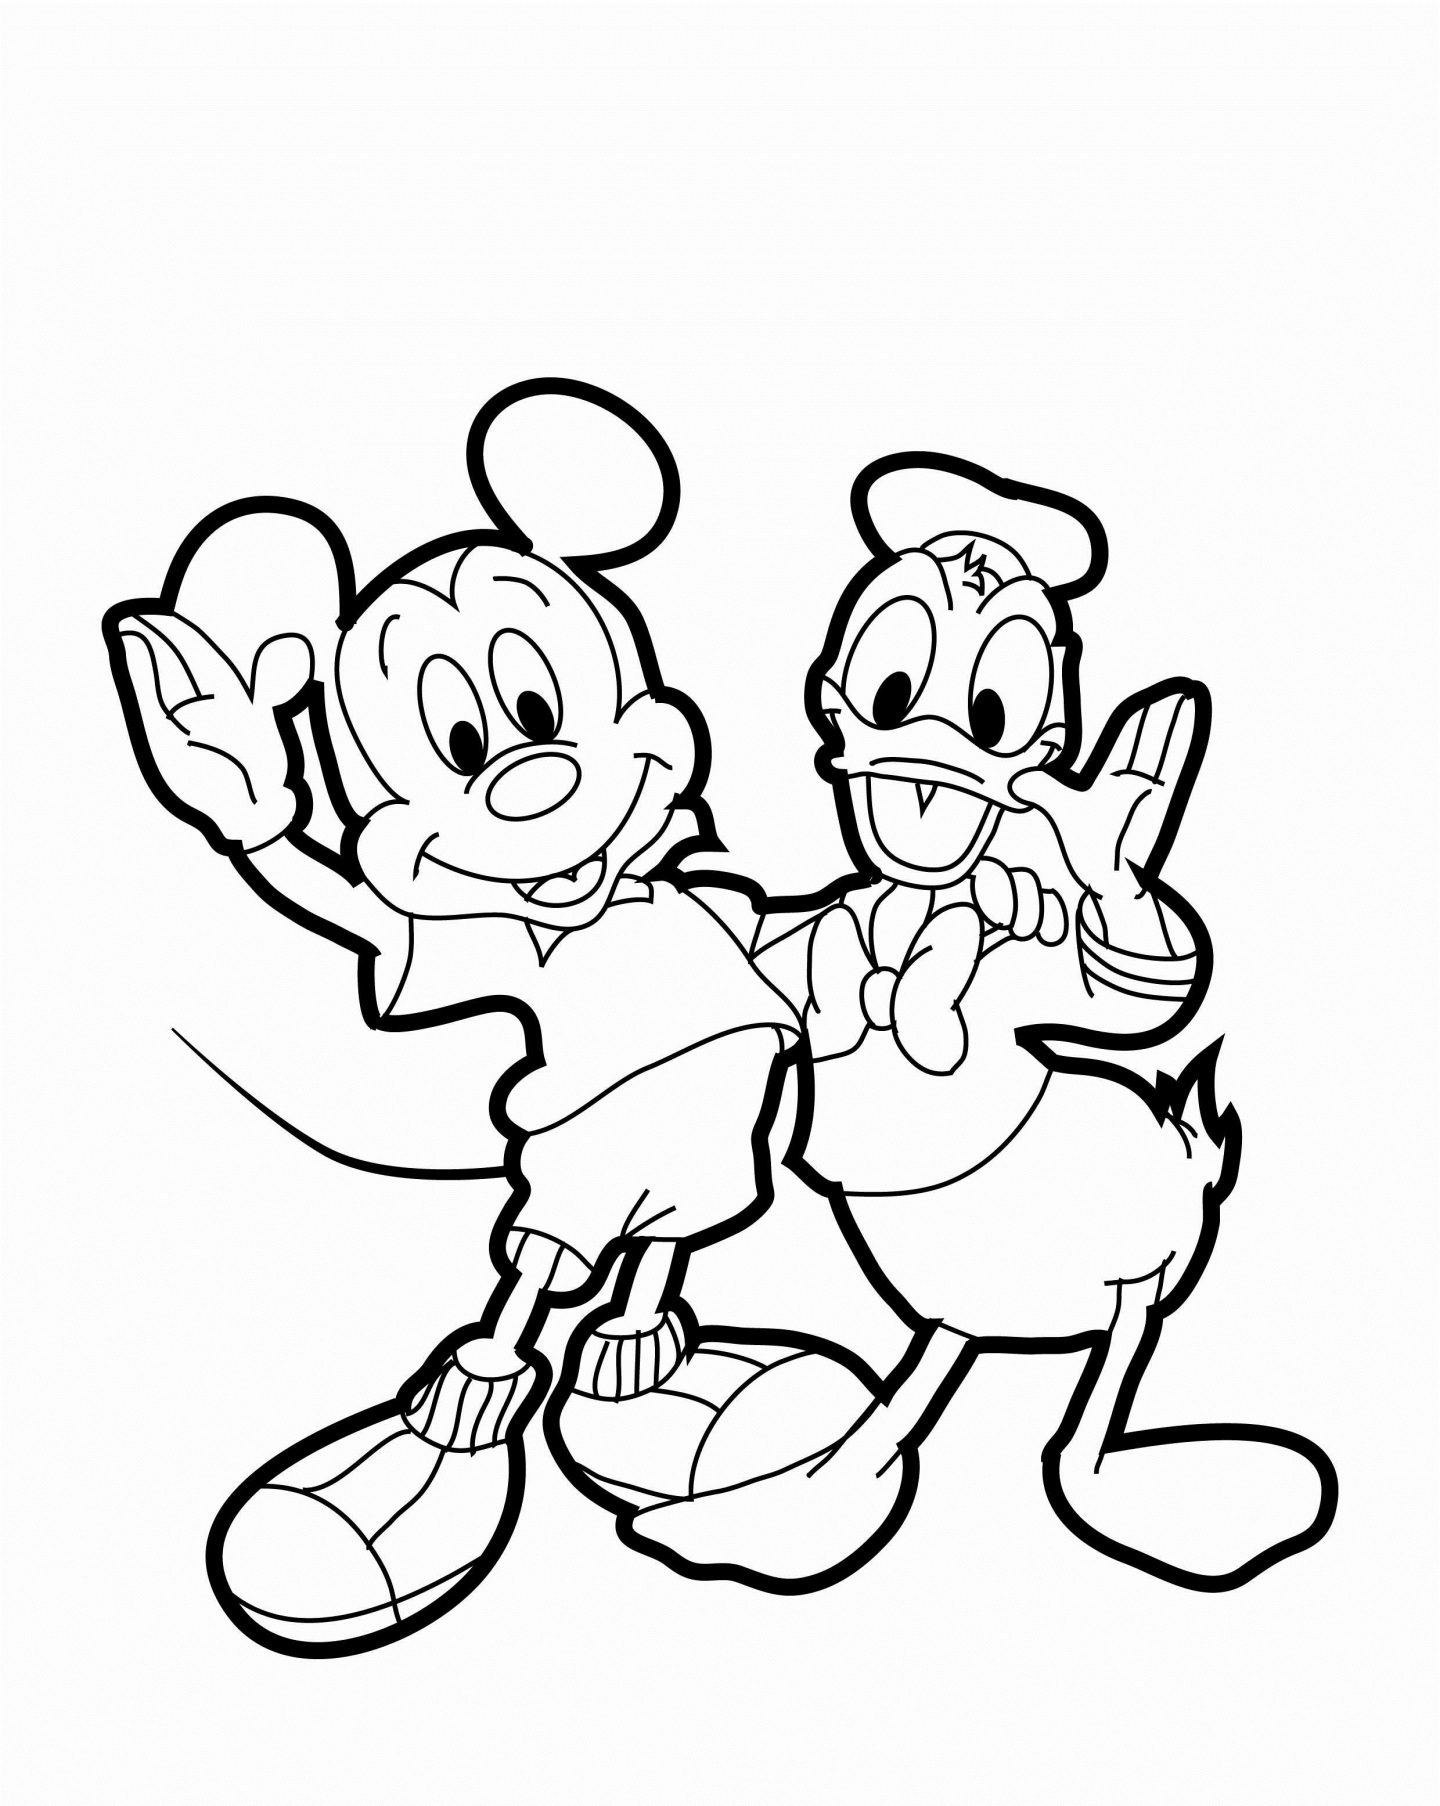 Best Friend Mickey And Donald Coloring Page - Free Printable Coloring